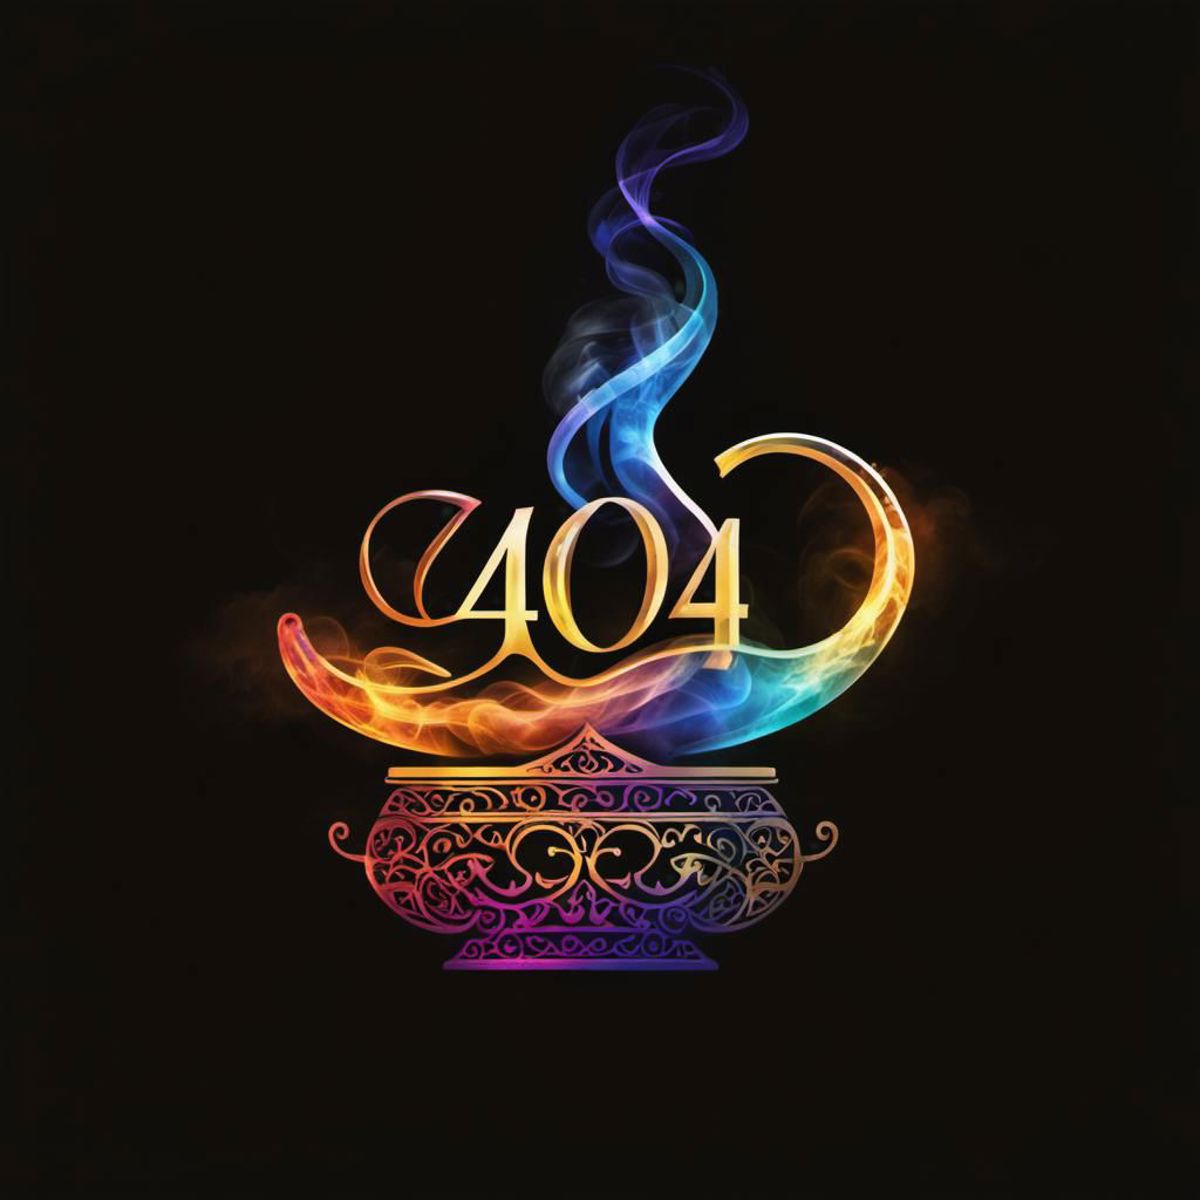 A Rainbow-colored 404 Error Lamp with Smoke.